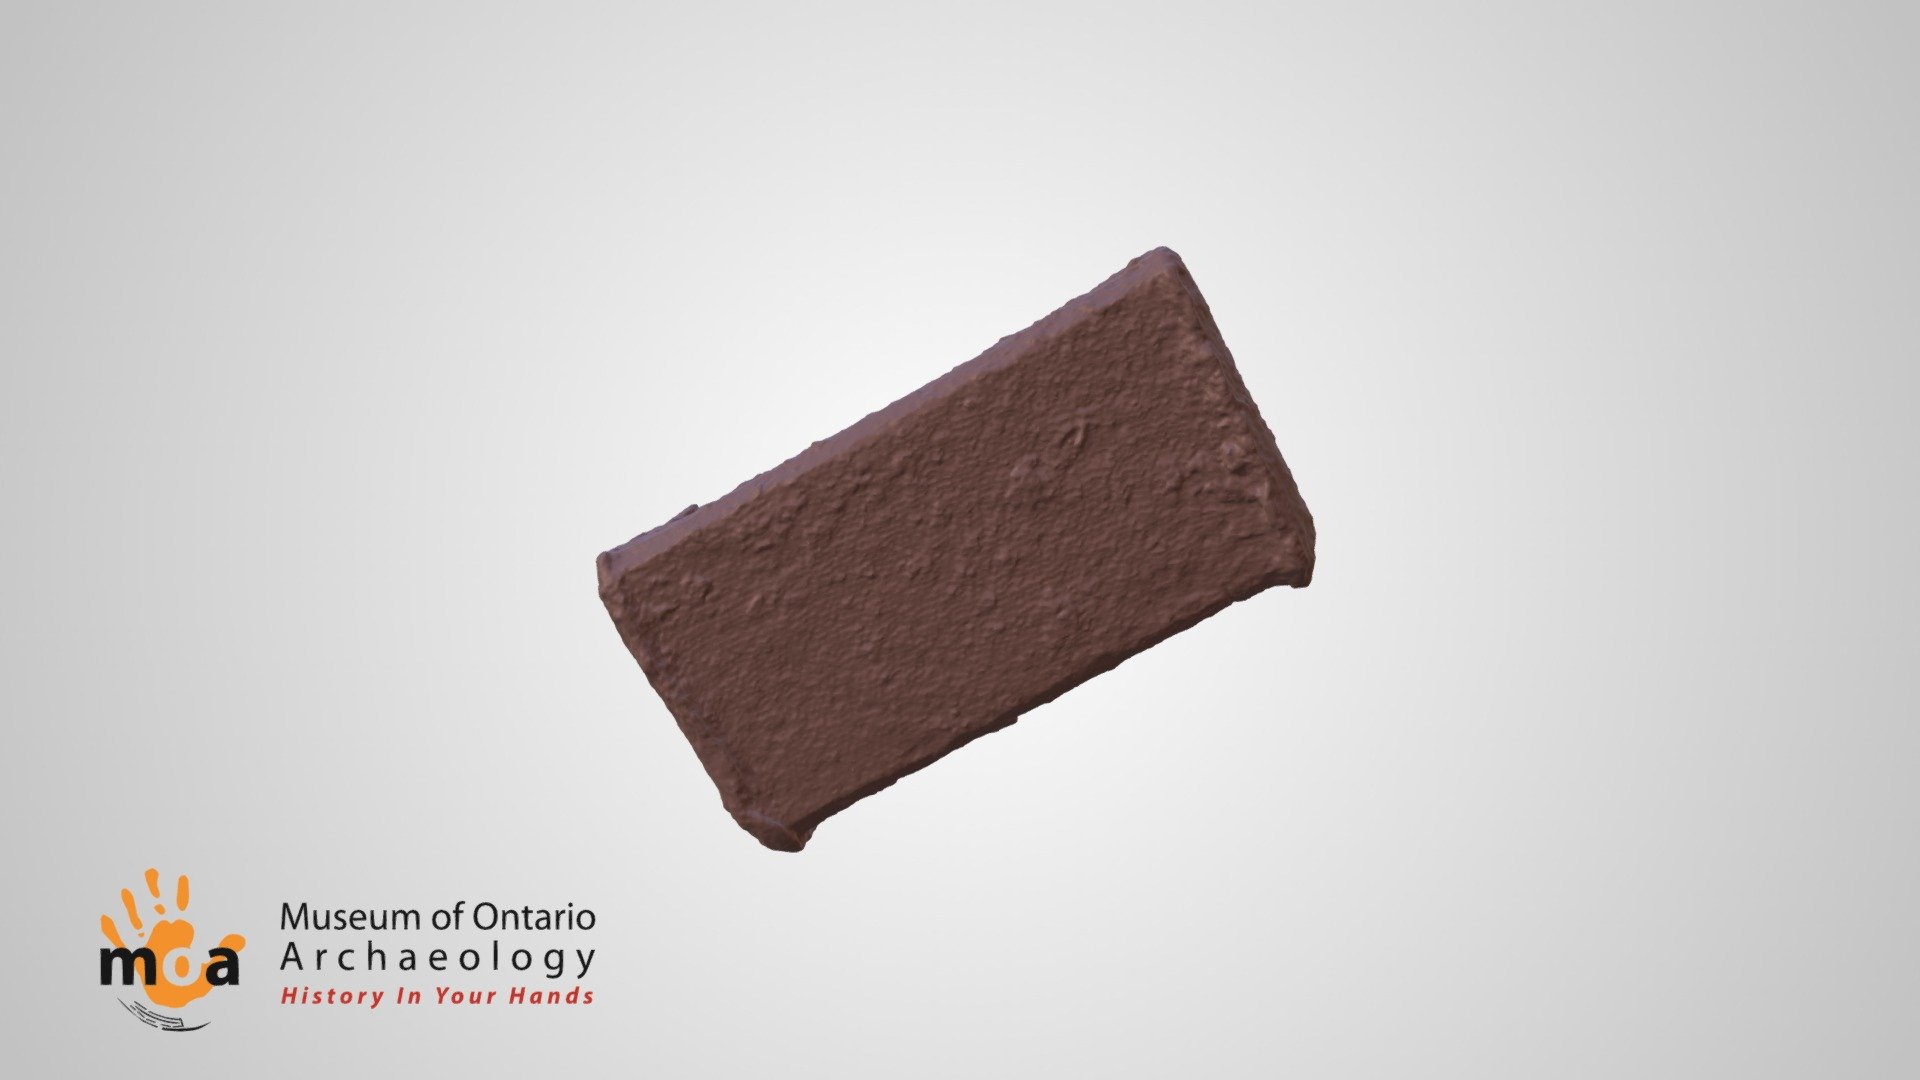 This artifact was found during the Museum of Ontario Archaeology's excavations of the Ste. Marie II site in the 1980s. The Ste. Marie site is located on the southern coast of Christian Island. A sledge such as this would have been used by the Jesuits at the site to create and manufacture buildings on site in the 17th century 3d model